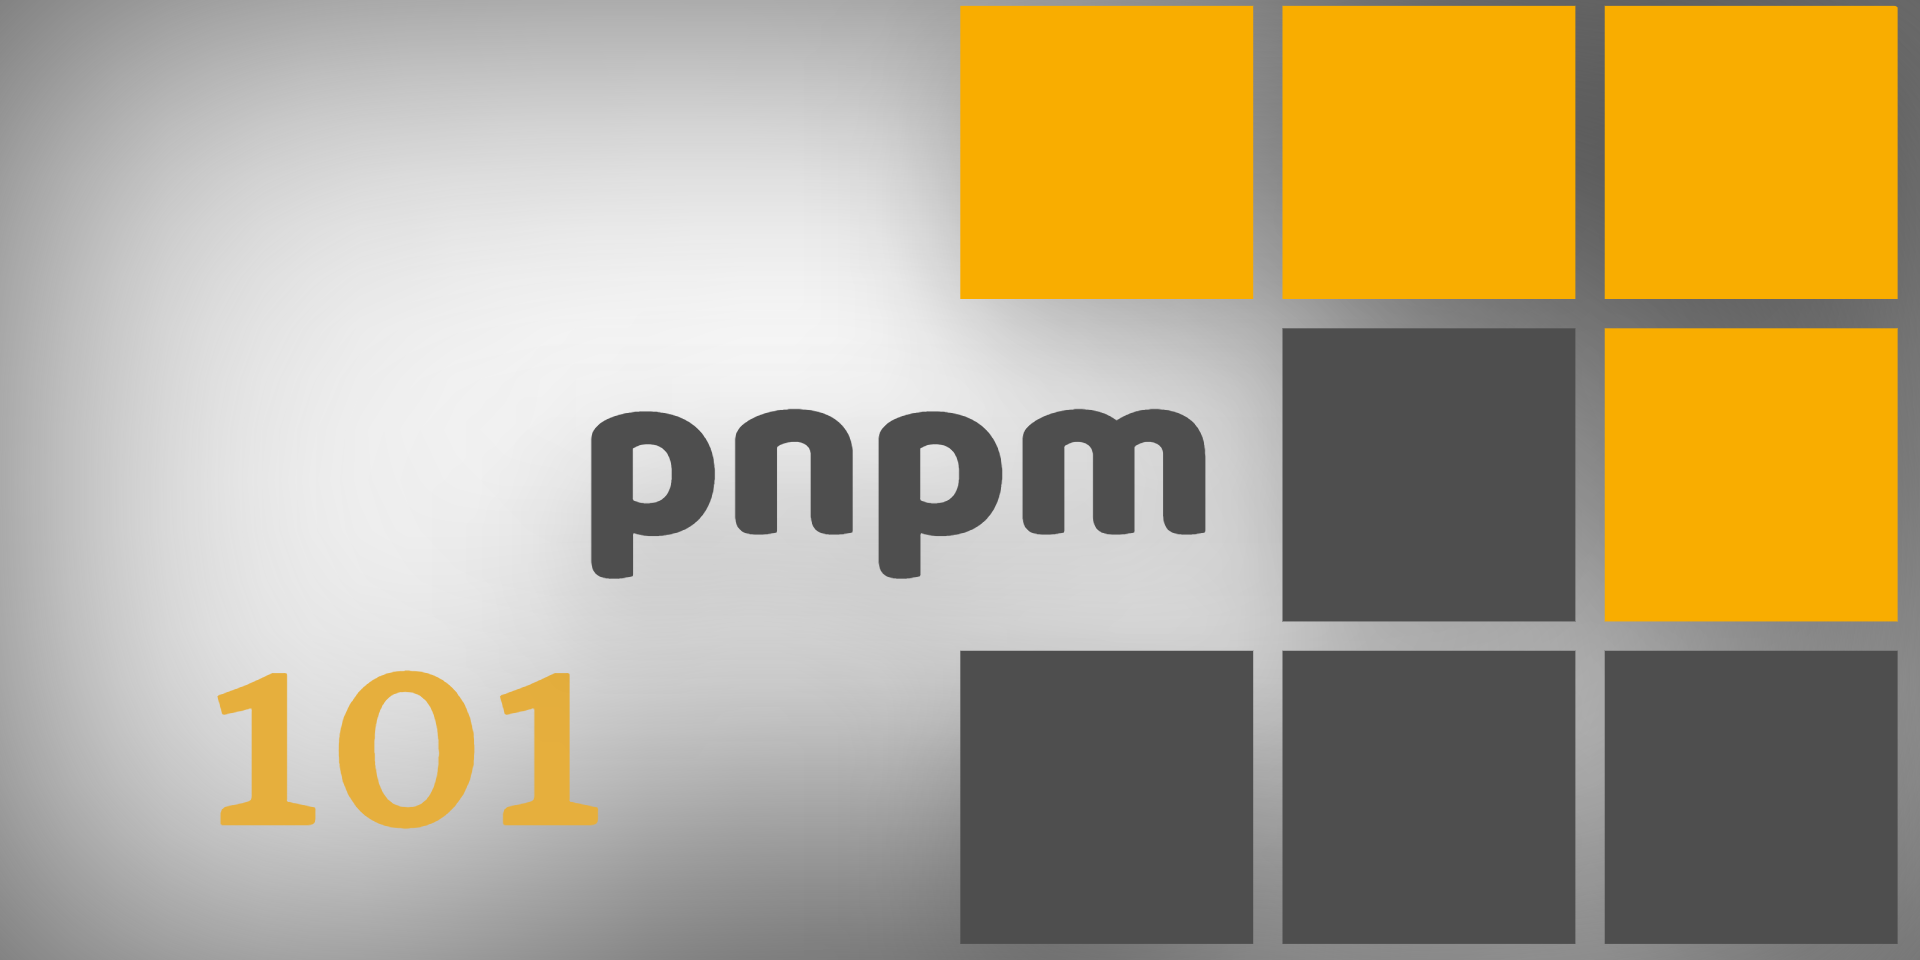 Who is using pnpm?